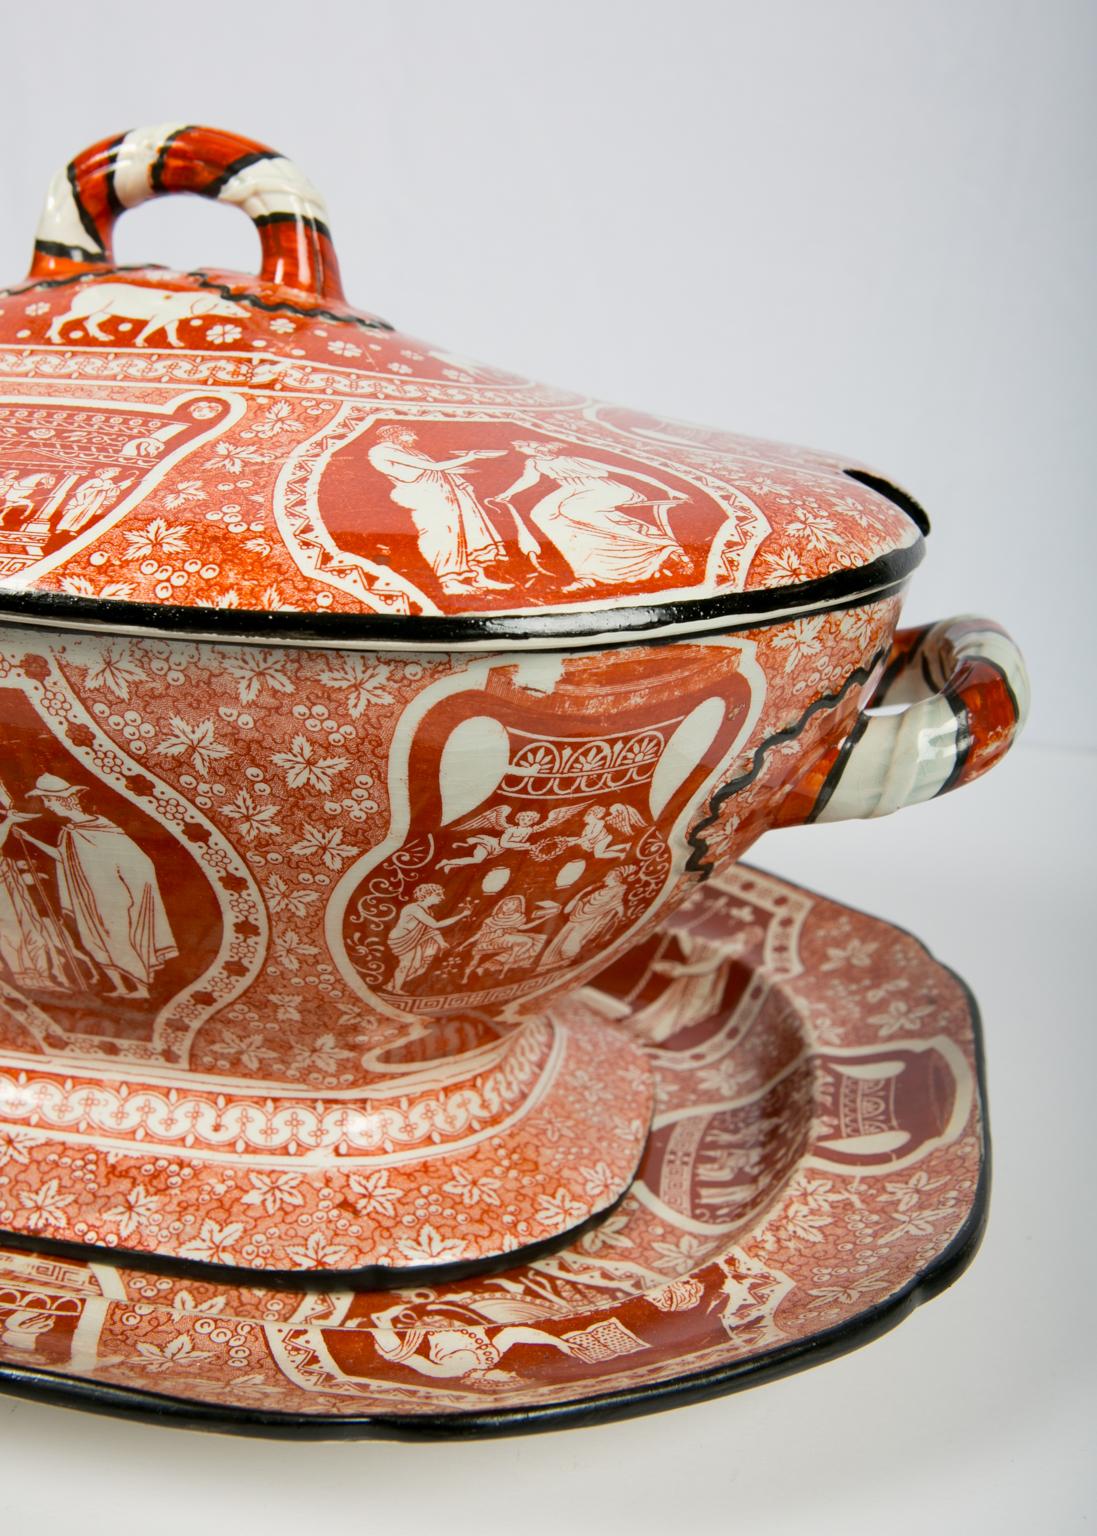 red soup tureen